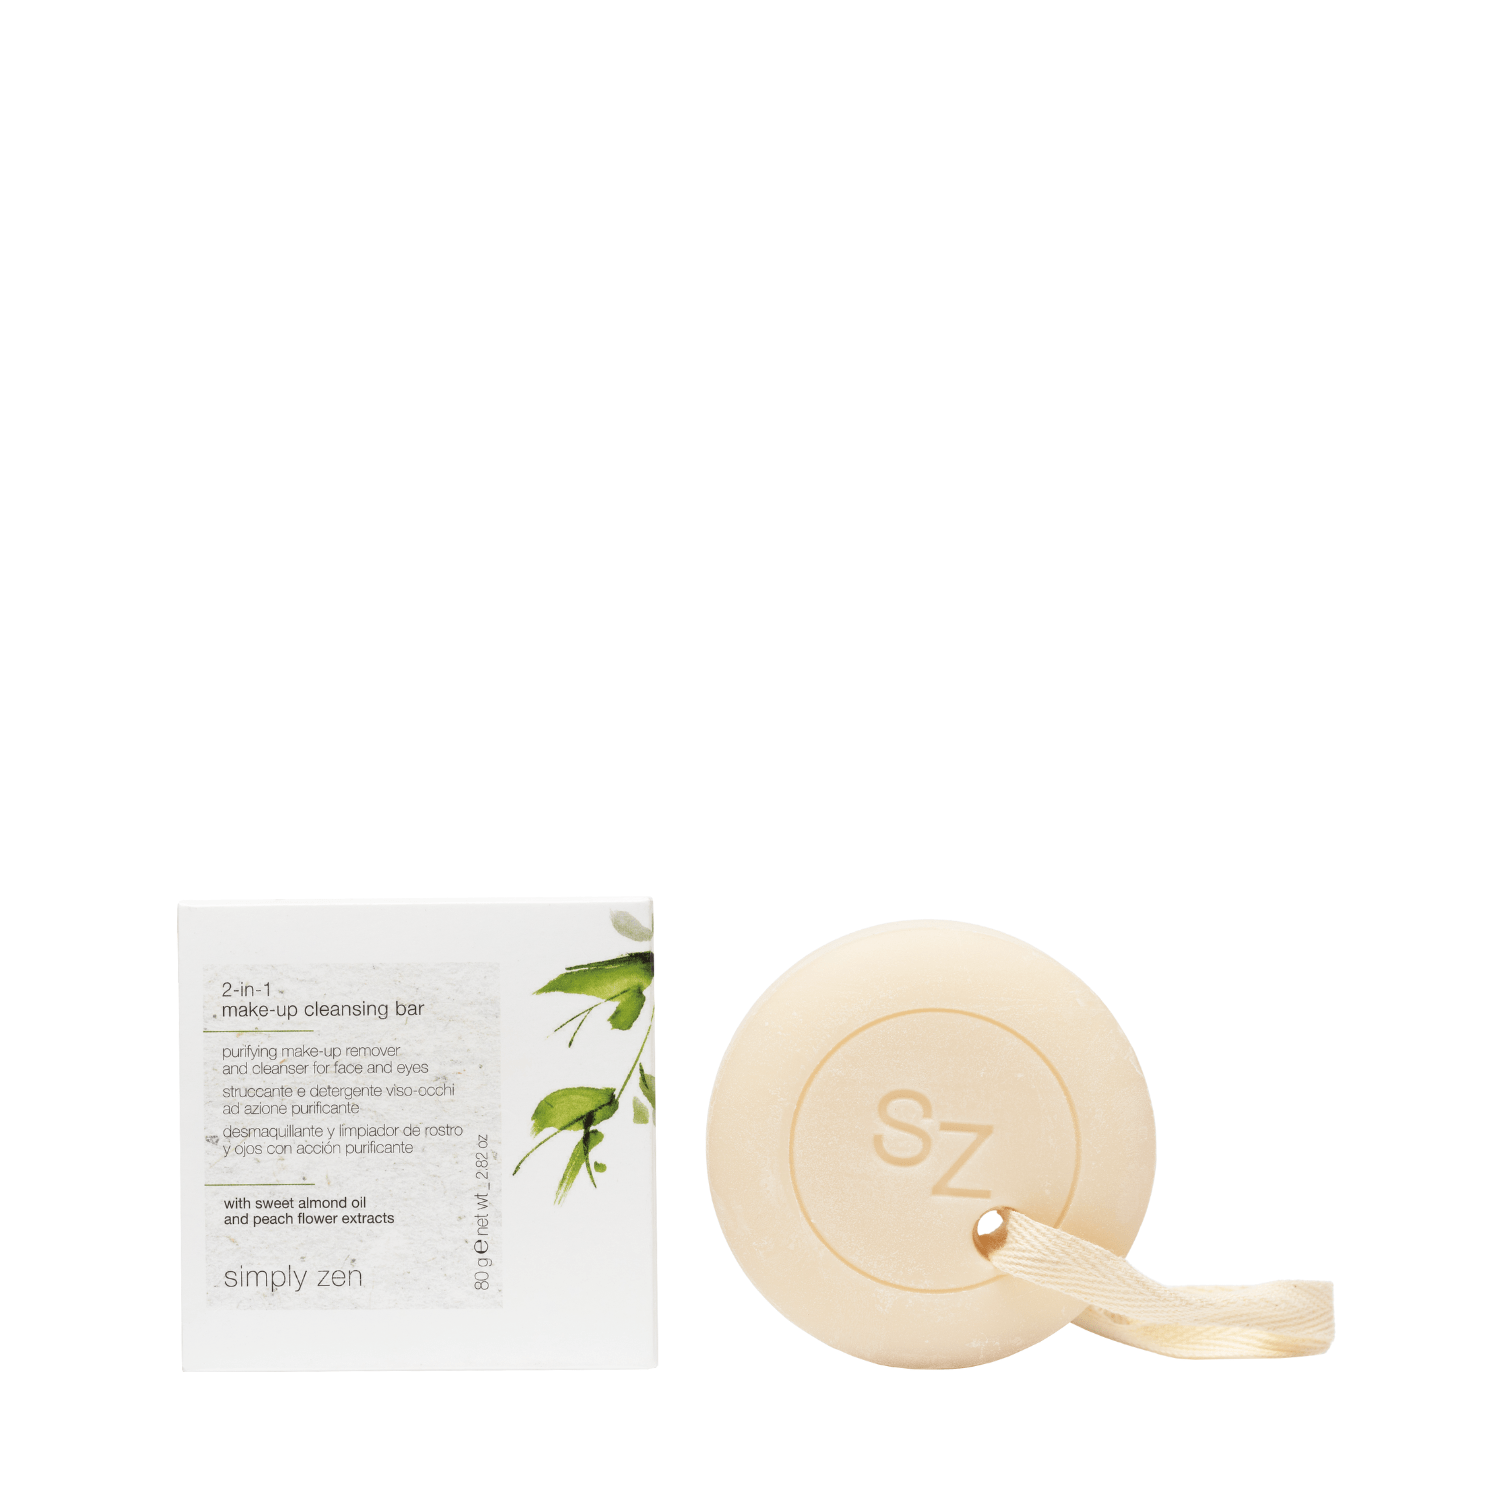 2-in-1 make-up cleansing bar